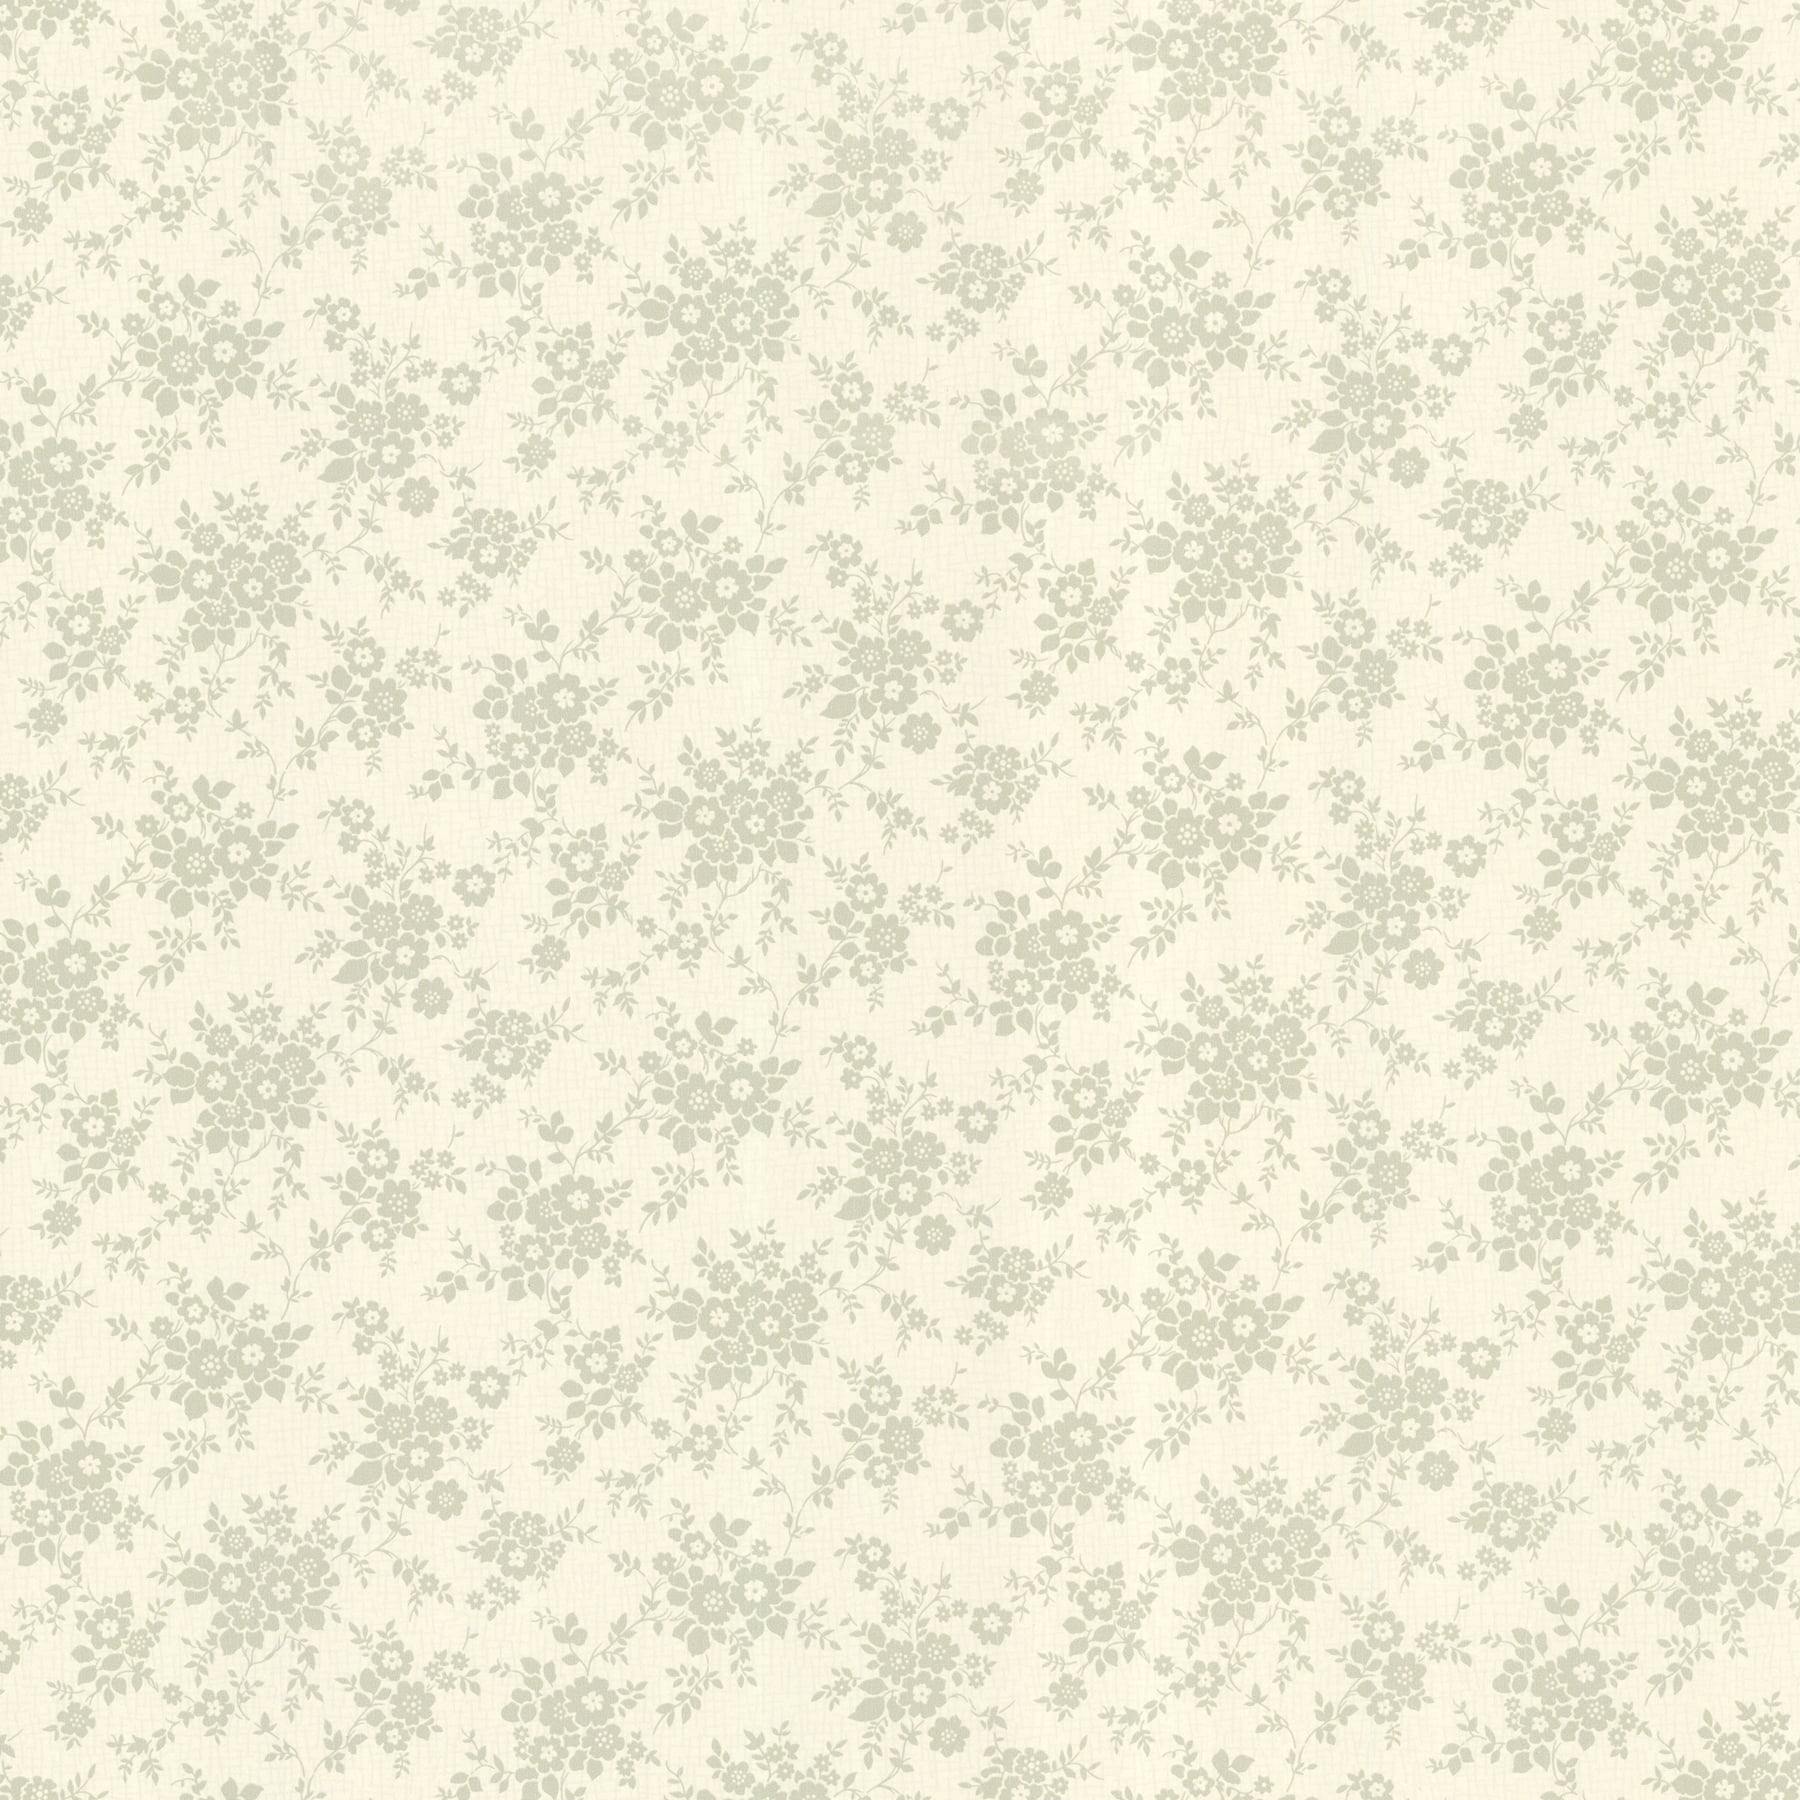 AS Creation Esprit 8 Wallpaper Roll  21in  Delicate Floral Pattern   Grey and Light Blue  RONA